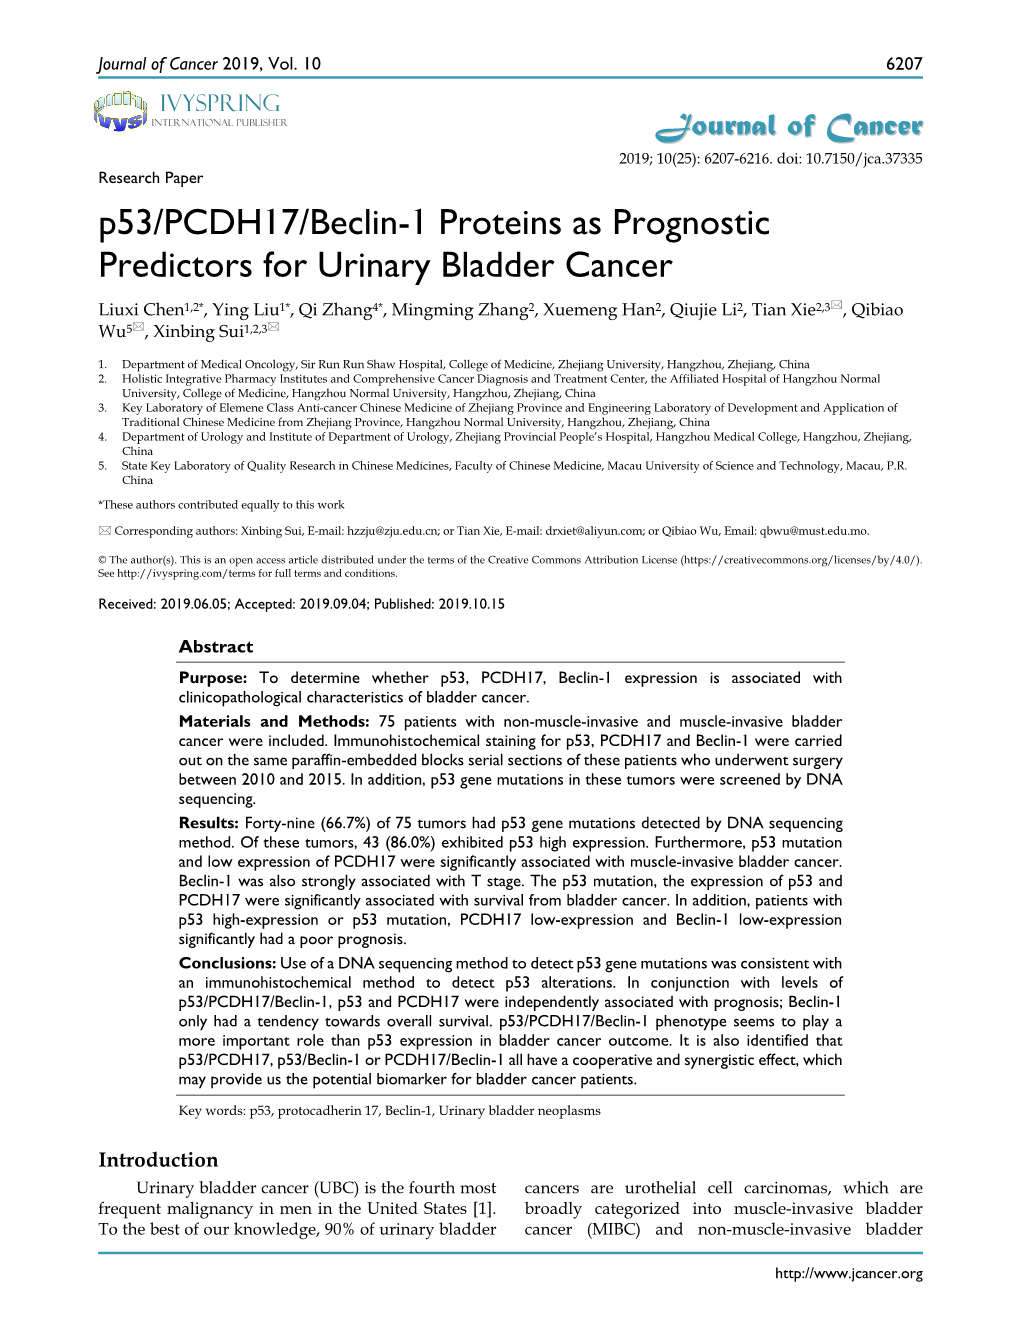 P53/PCDH17/Beclin-1 Proteins As Prognostic Predictors for Urinary